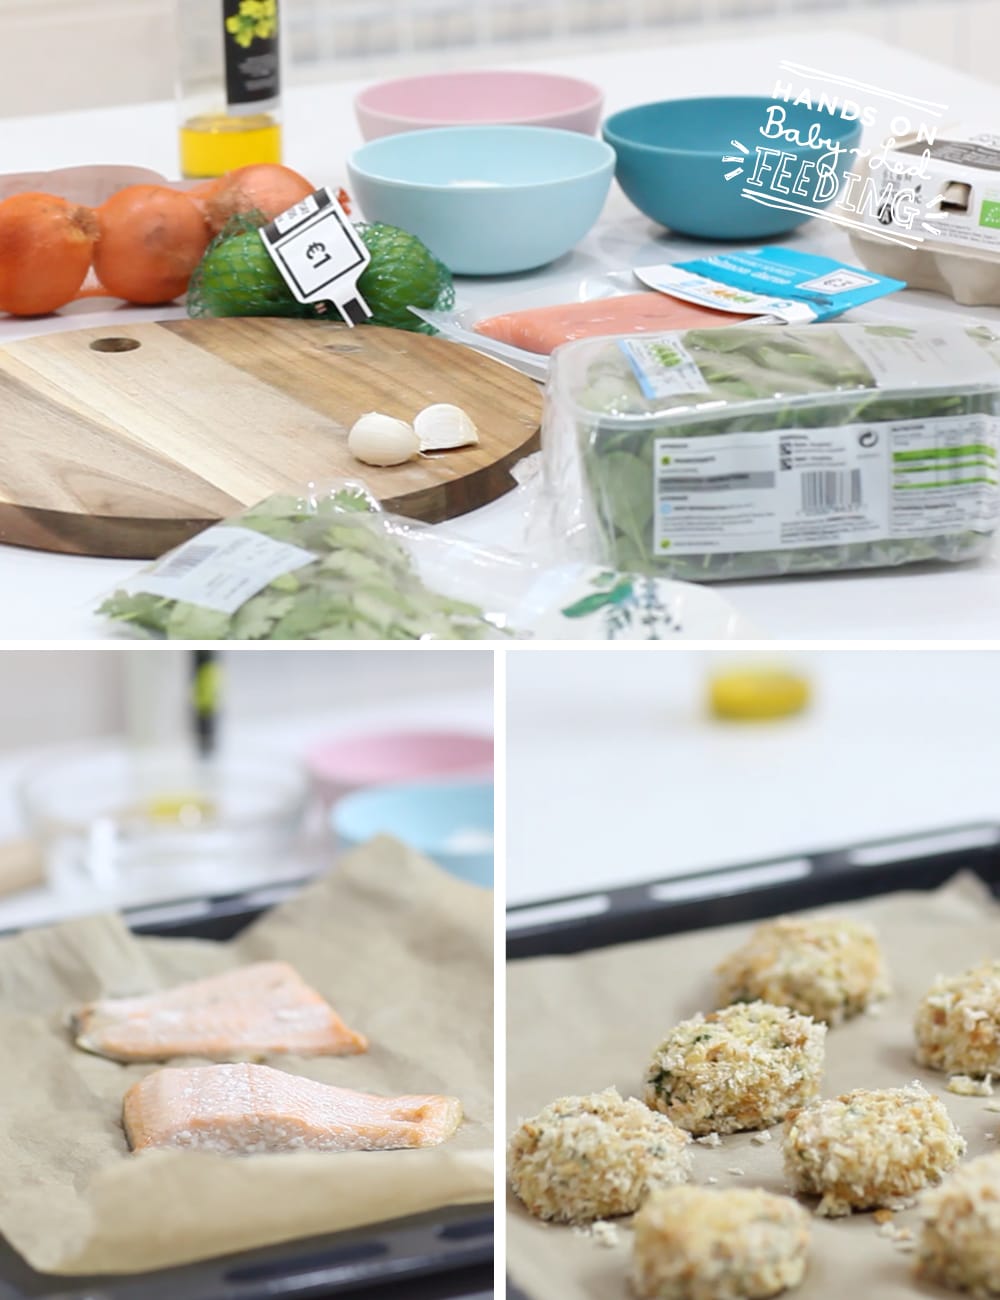 Baby Led Feeding Salmon Nuggets for baby led weaning Recipe image Dunnes Stores Everyday Savers image